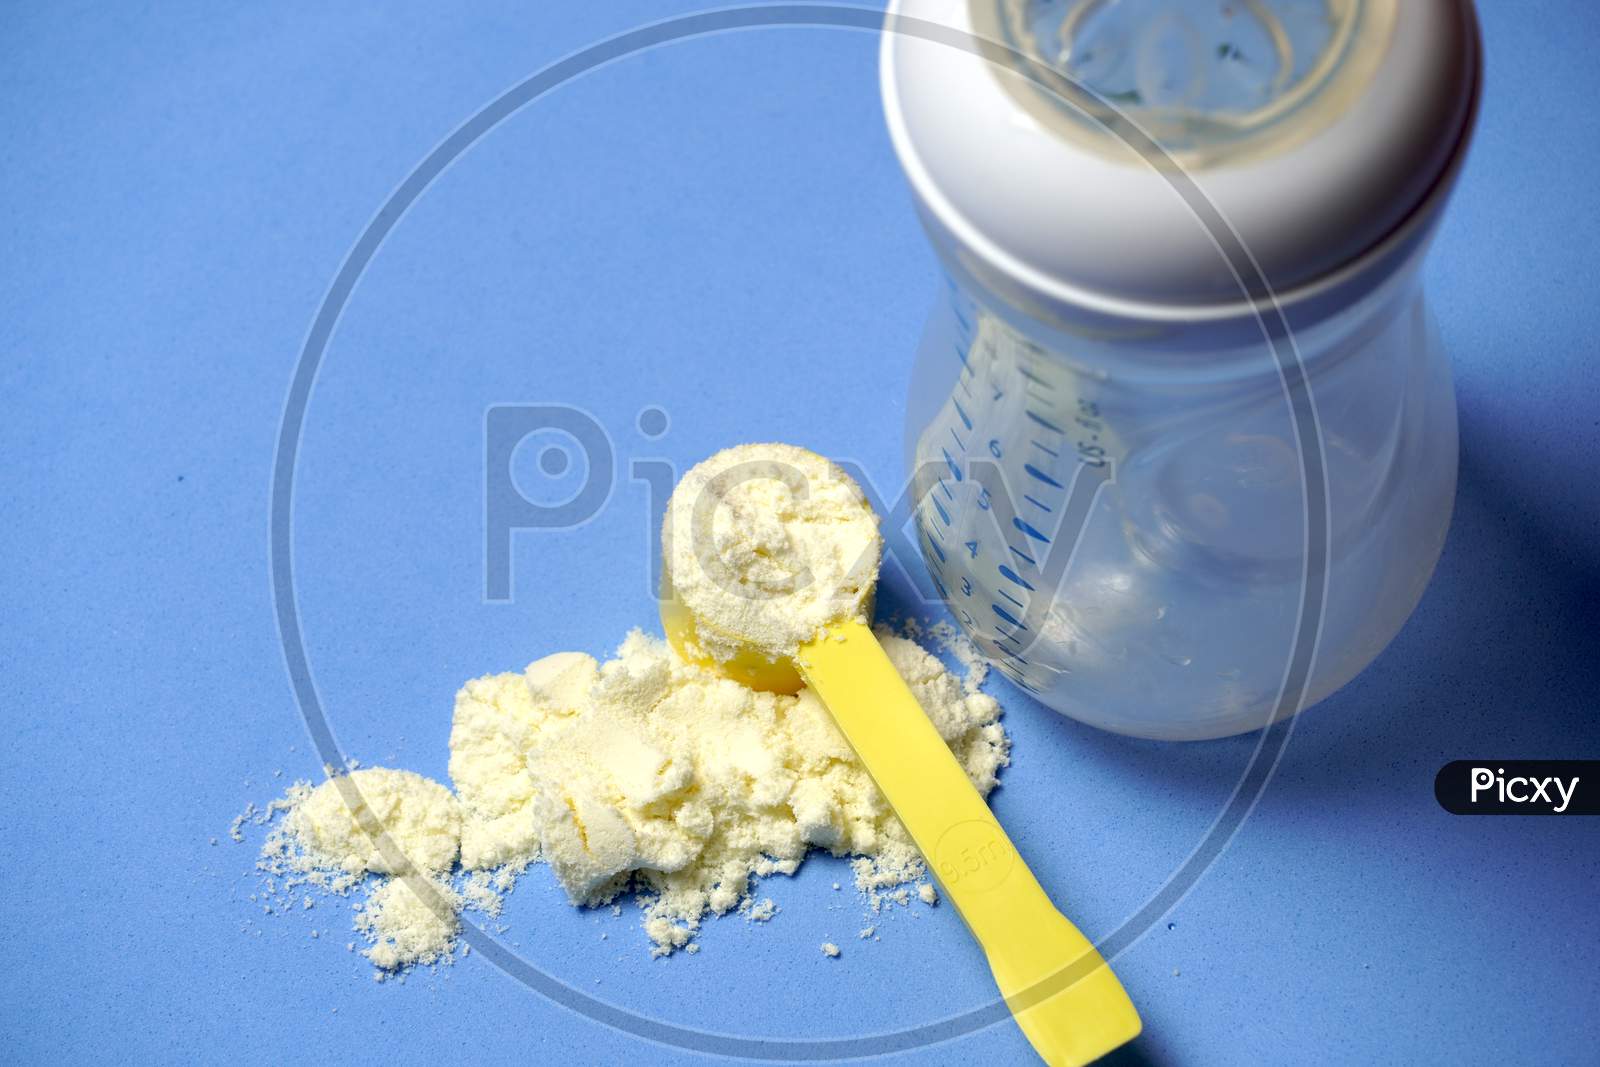 Top View Of Baby Powder Milk With Scoop Next To A Baby Bottle. Formula Milk